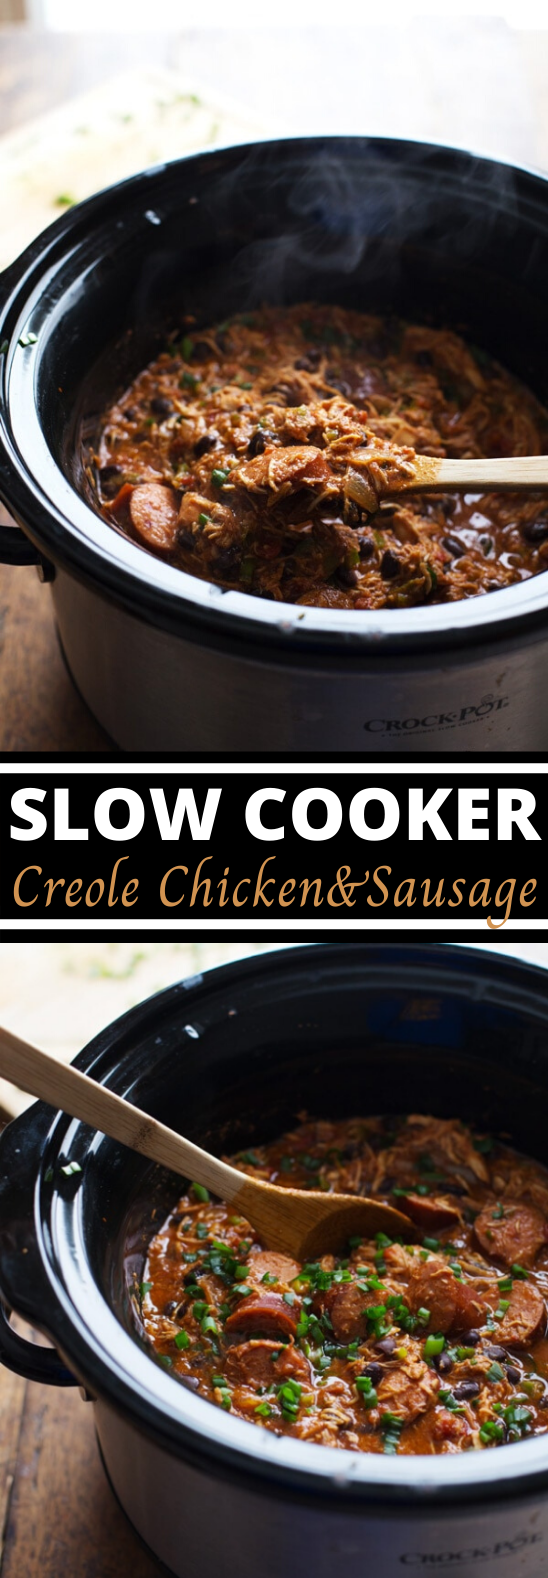 Slow Cooker Creole Chicken and Sausage #dinner #recipes #chicken #slowcooker #comfortfood